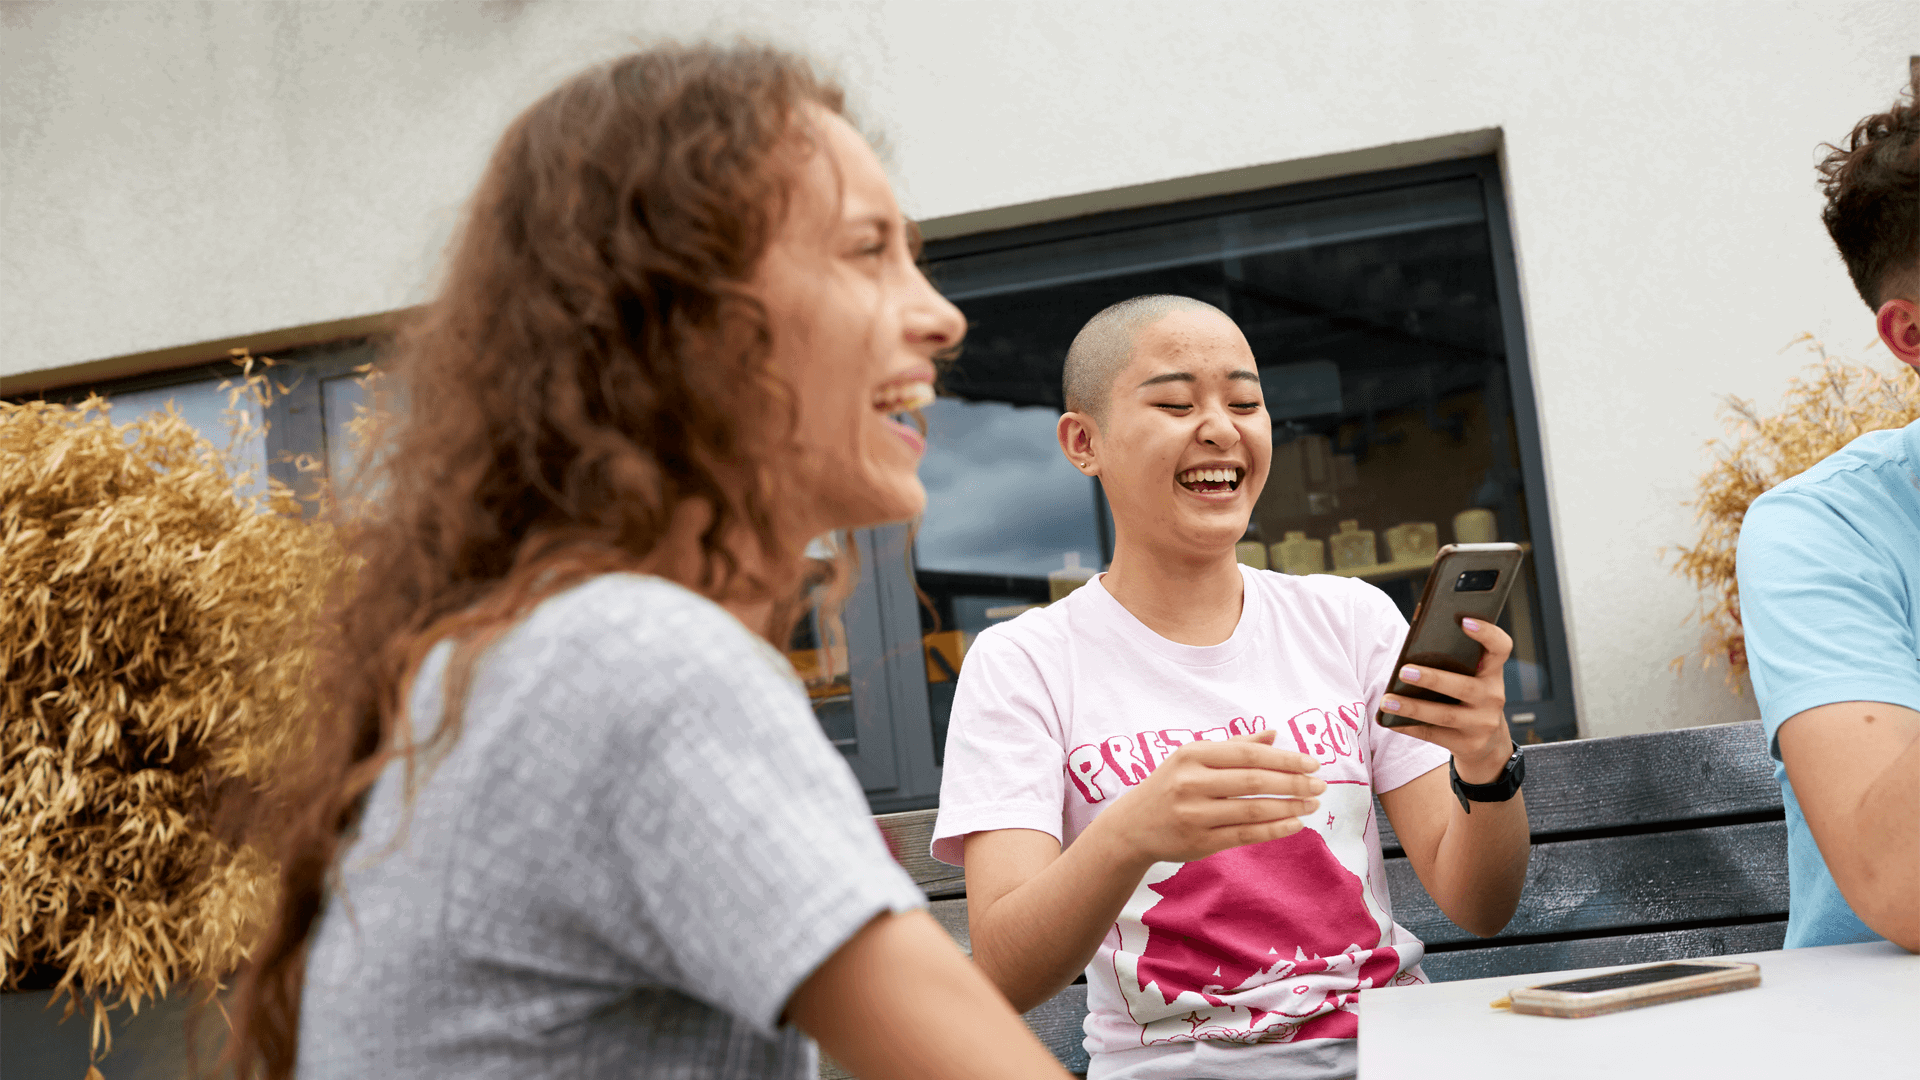 two-young-woman-laughing-while-one-is-hlding-her-phone-and-another-one-is-looking-at-their-friends-cropped-in-photo